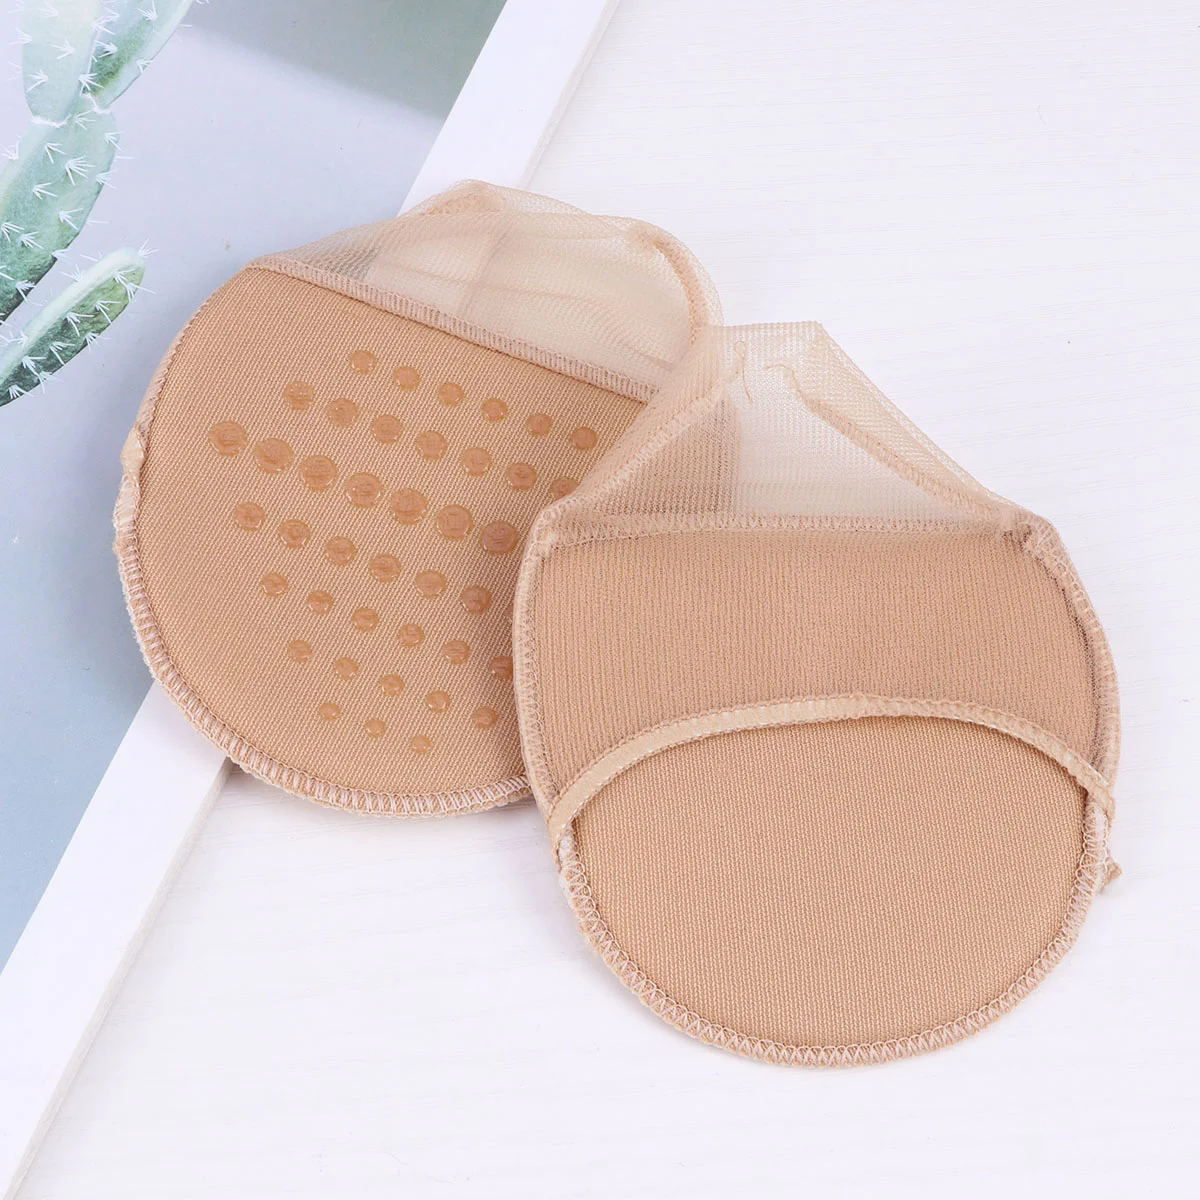 

3 Pairs of Open-toed Ultra-soft Forefoot Cushion Cushions Invisible Sponge Foot Pad High-heeled Shoes Protectors (Khaki)